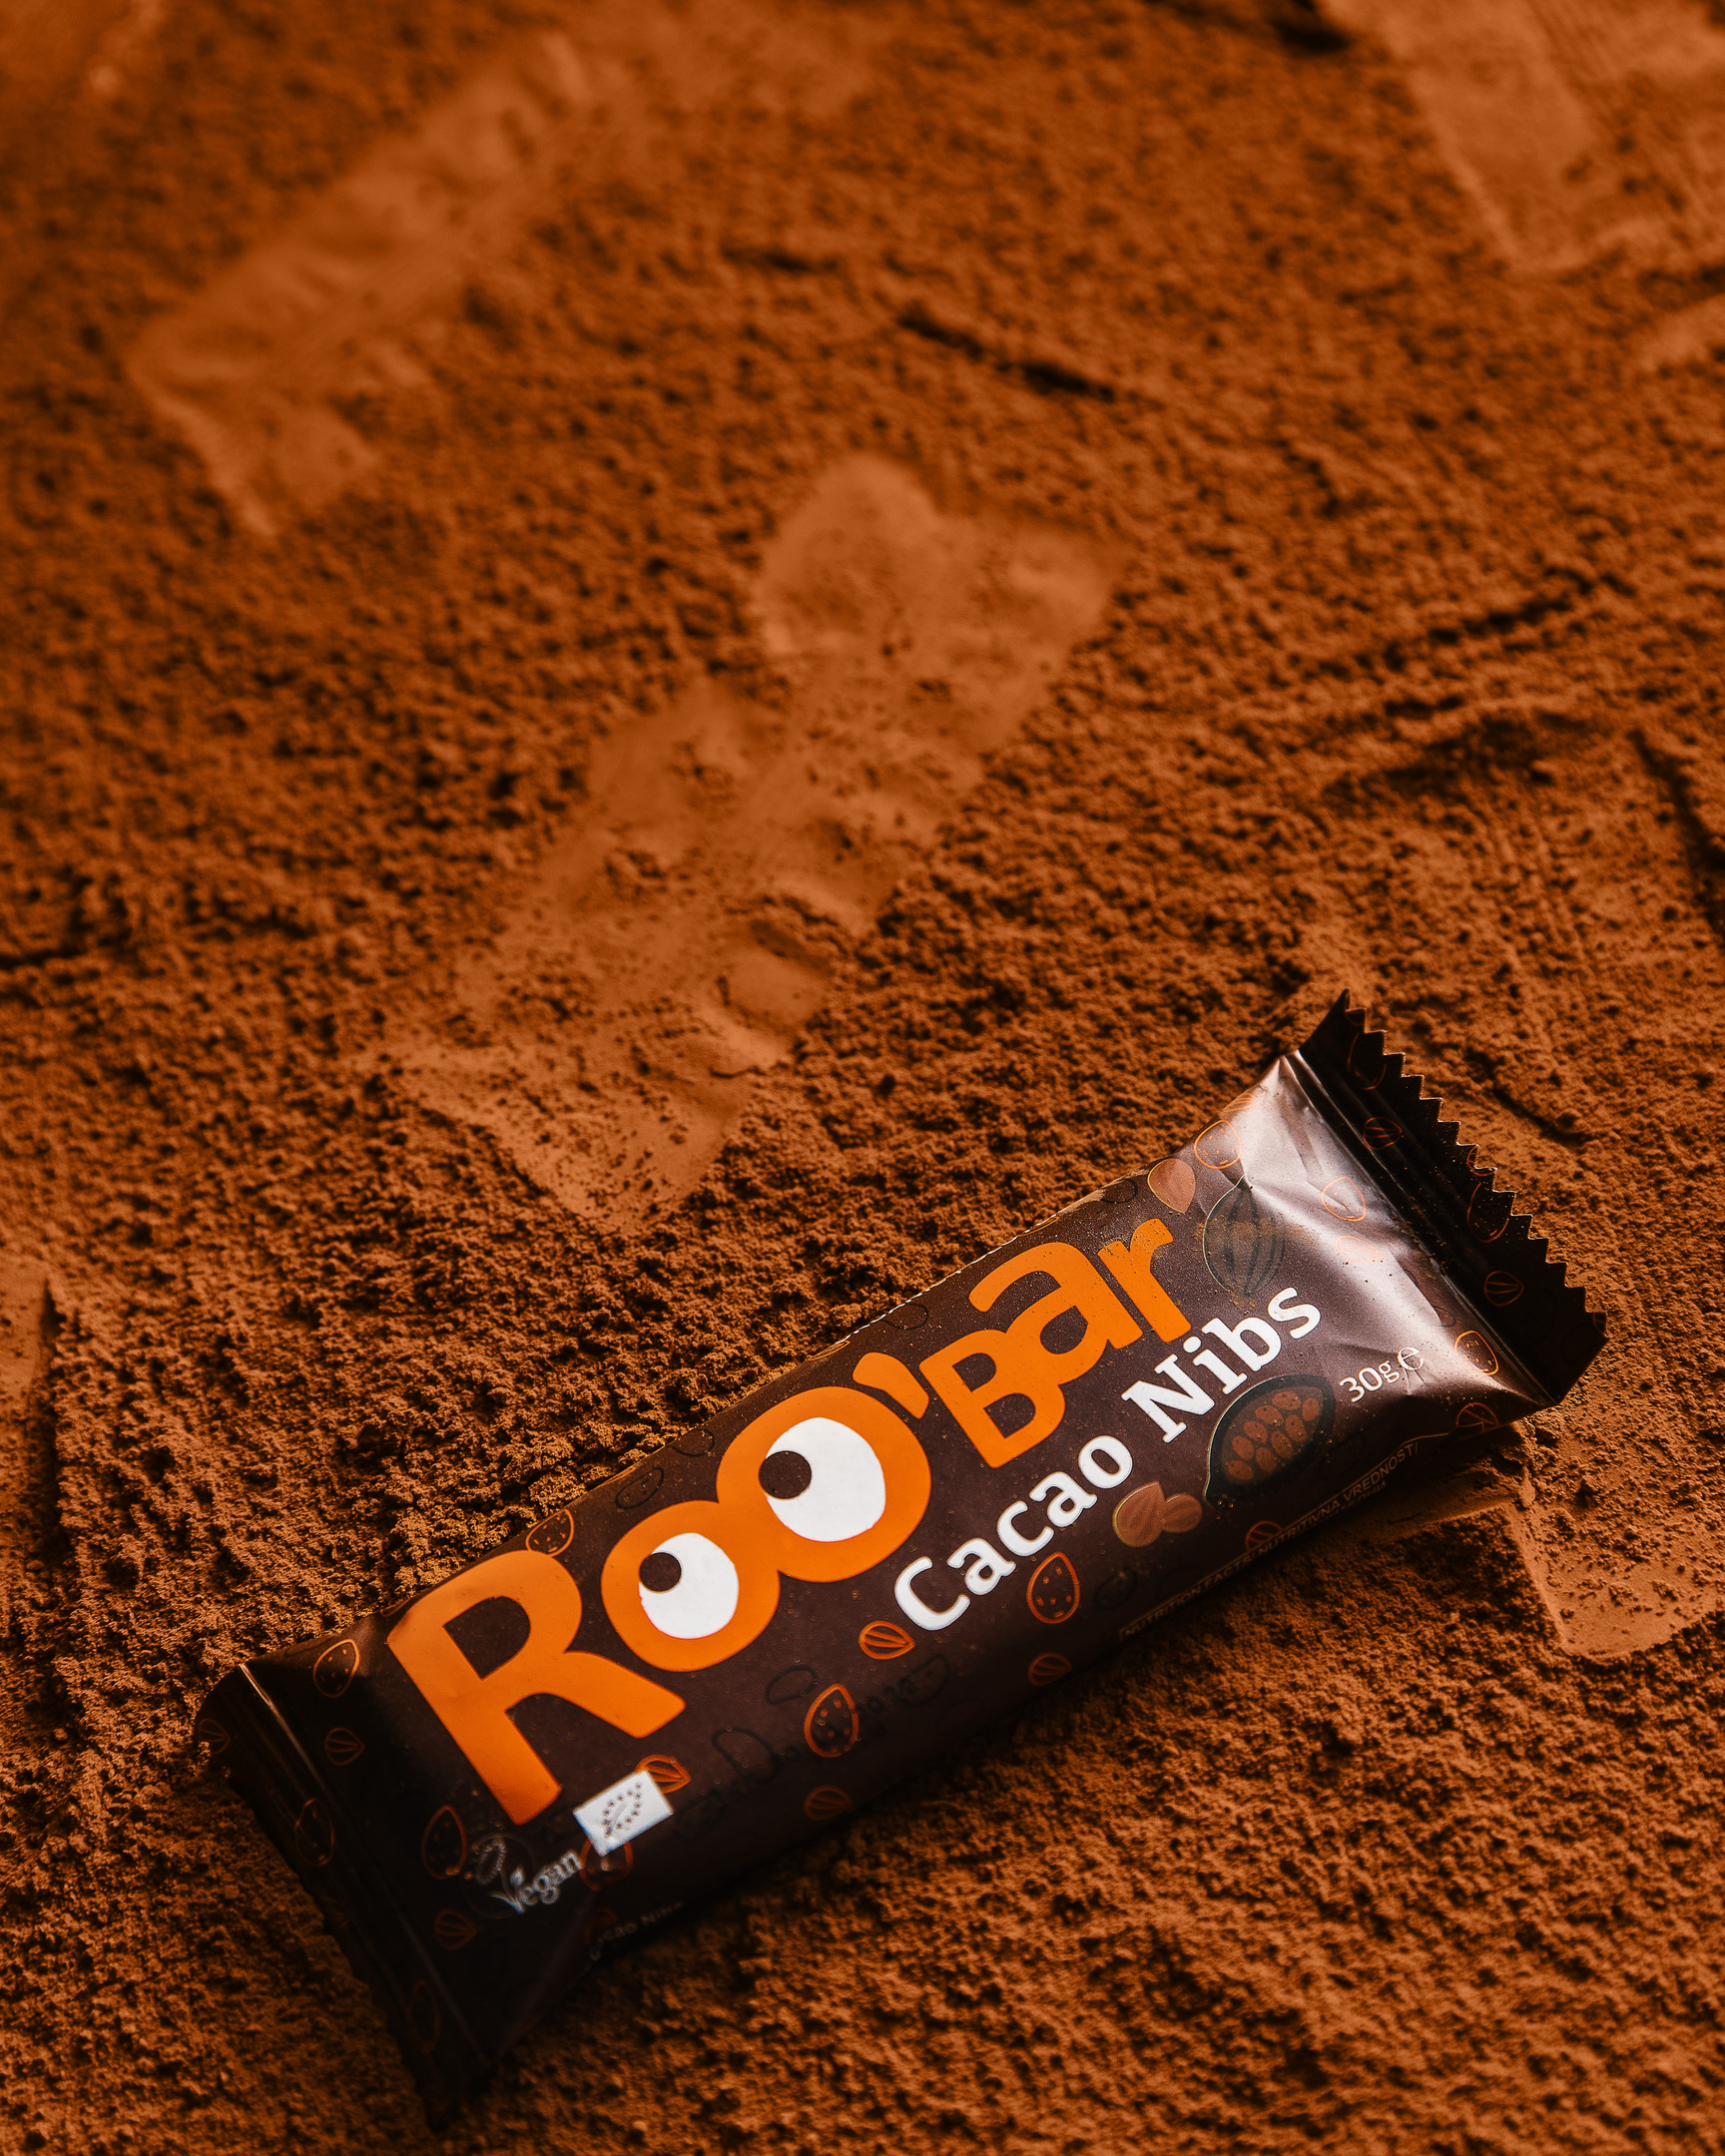 Roobar - Cacao Nibs. Roobar is crawling the surface made of cacao like a first person on the Moon.